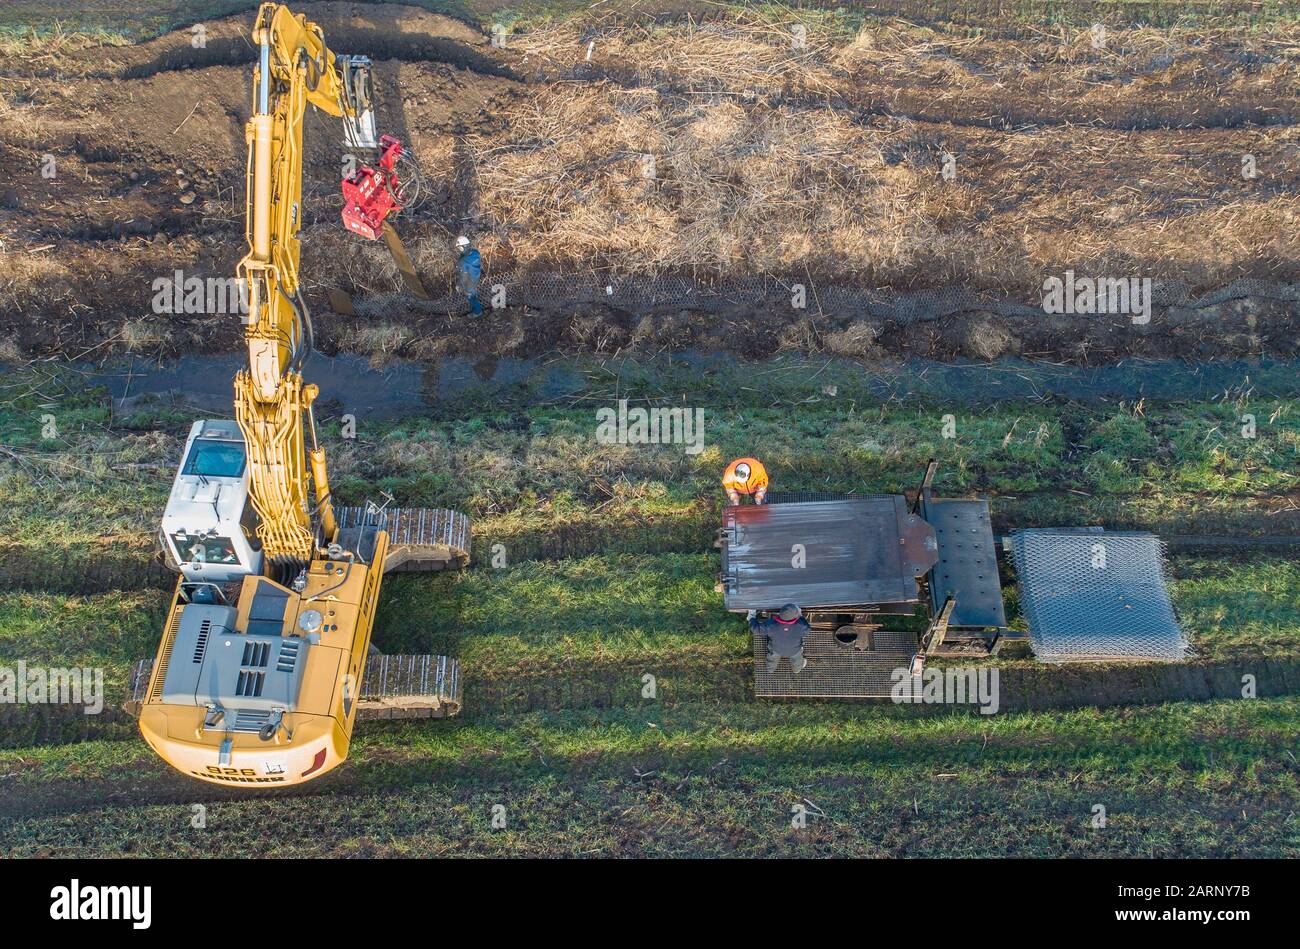 Wriezen, Germany. 27th Jan, 2020. Employees of Ingenieur Wasser und Tiefbau GmbH (IWT) Frankfurt (Oder) are inserting special grids into the soil on one side of a trench (recorded with a drone). The patent of the Frankfurt company slows down the beavers in the Oderbruch. At moats and dikes, vertically buried protective mats prevent nocturnal animals from digging into the ground. Nevertheless, the beaver feels right at home in the cultural landscape. Credit: Patrick Pleul/dpa-Zentralbild/ZB/dpa/Alamy Live News Stock Photo